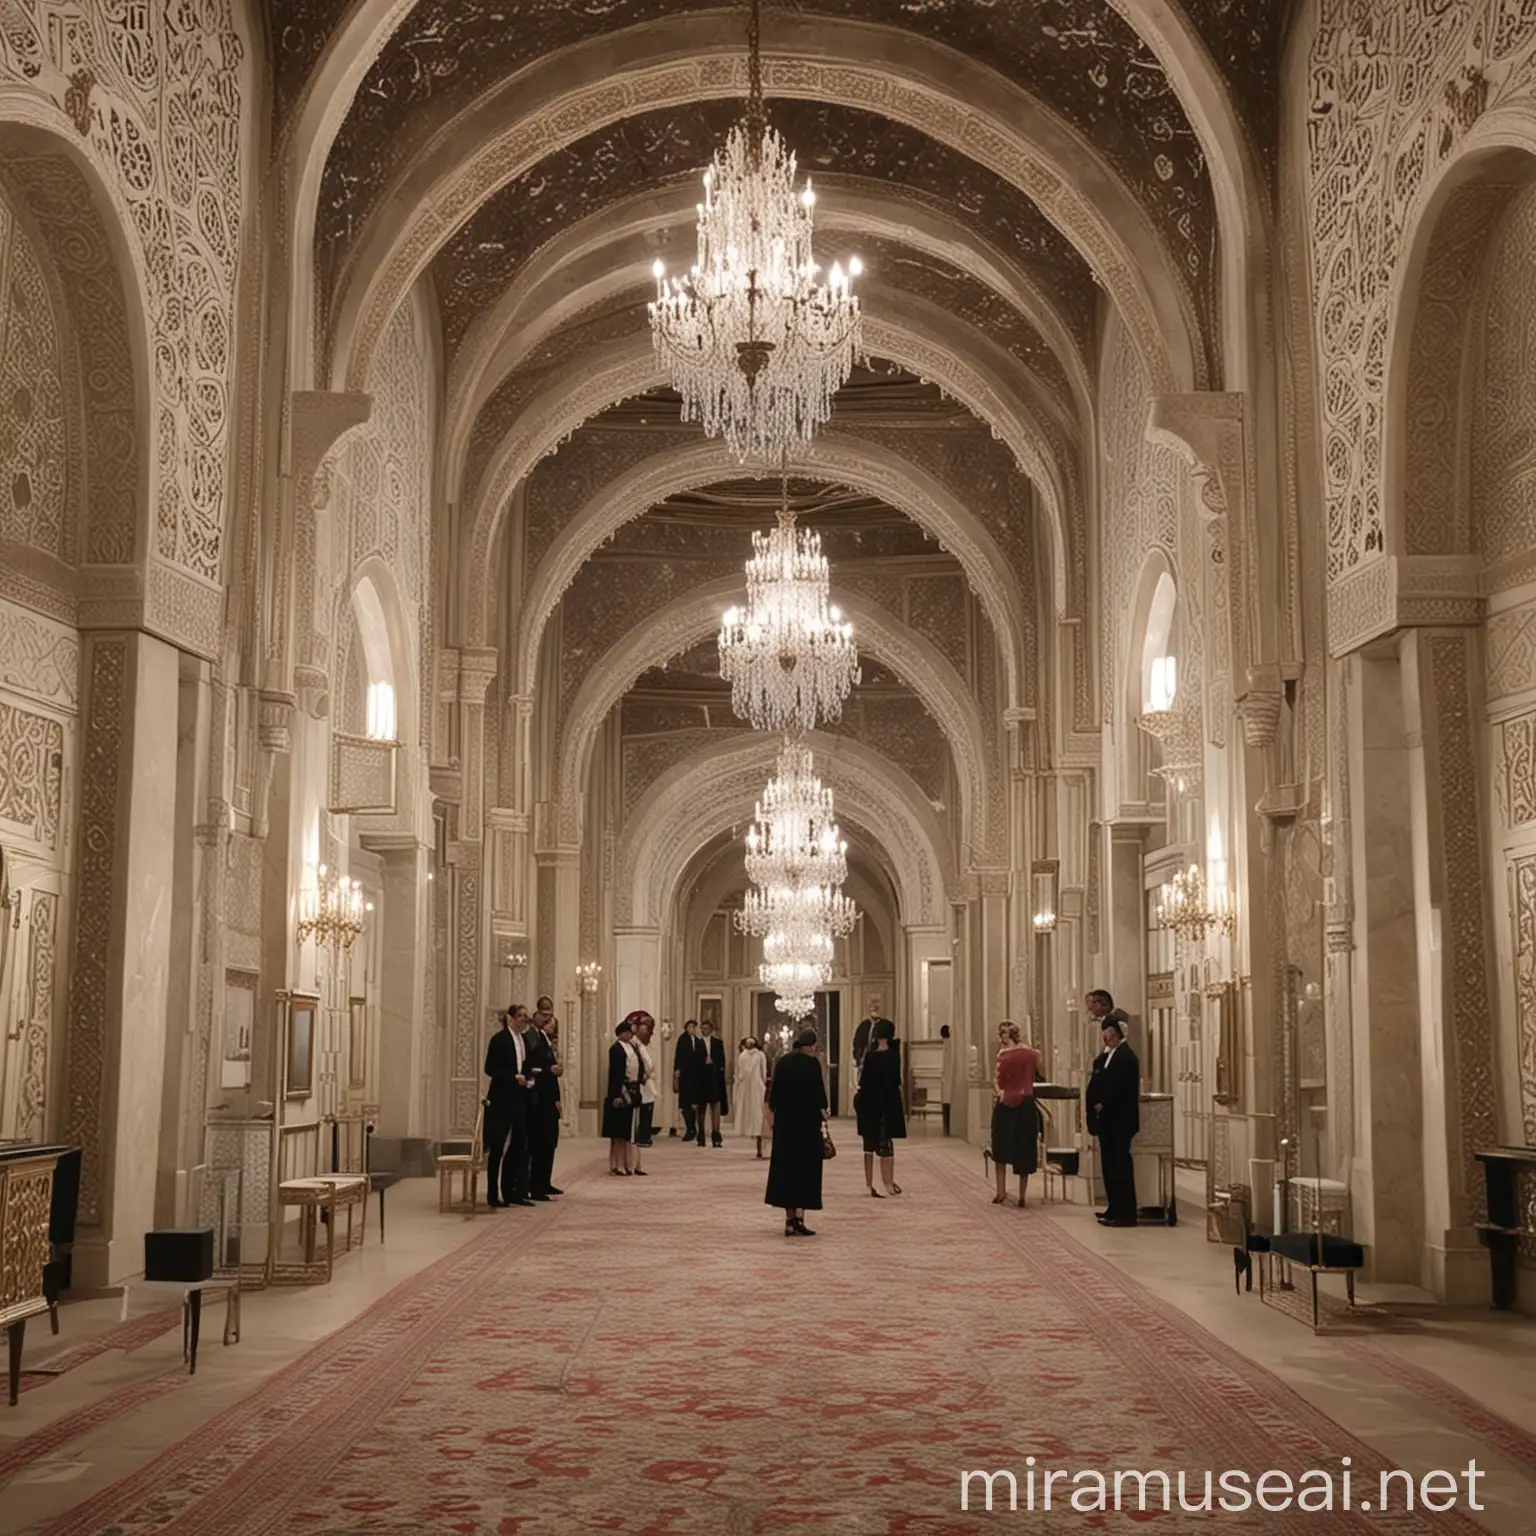 Chanel and Cartier Collection at the Historic Mahkama Palace in Casablanca